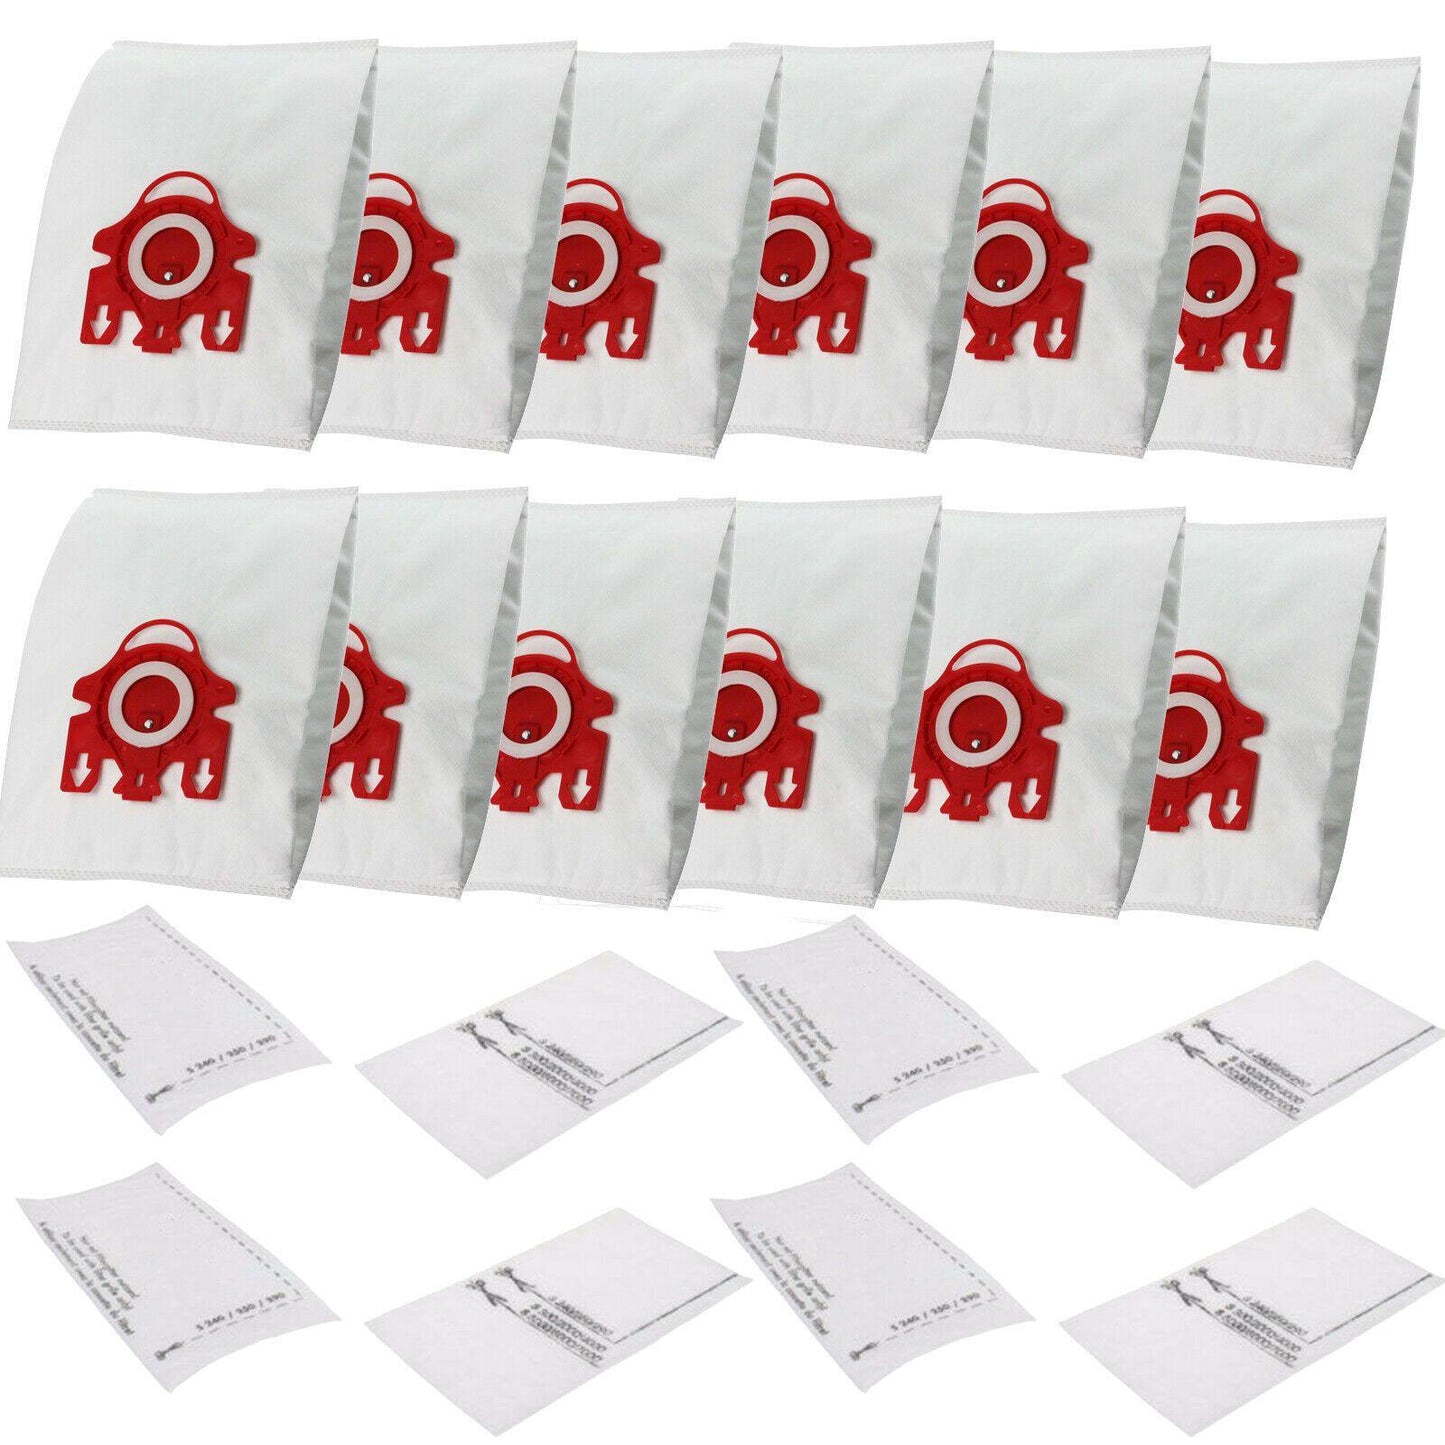 12 Vacuum Cleaner Bags, Filters For Miele Compact C1 C2 S4 S6 S290 S381 S517 Sparesbarn